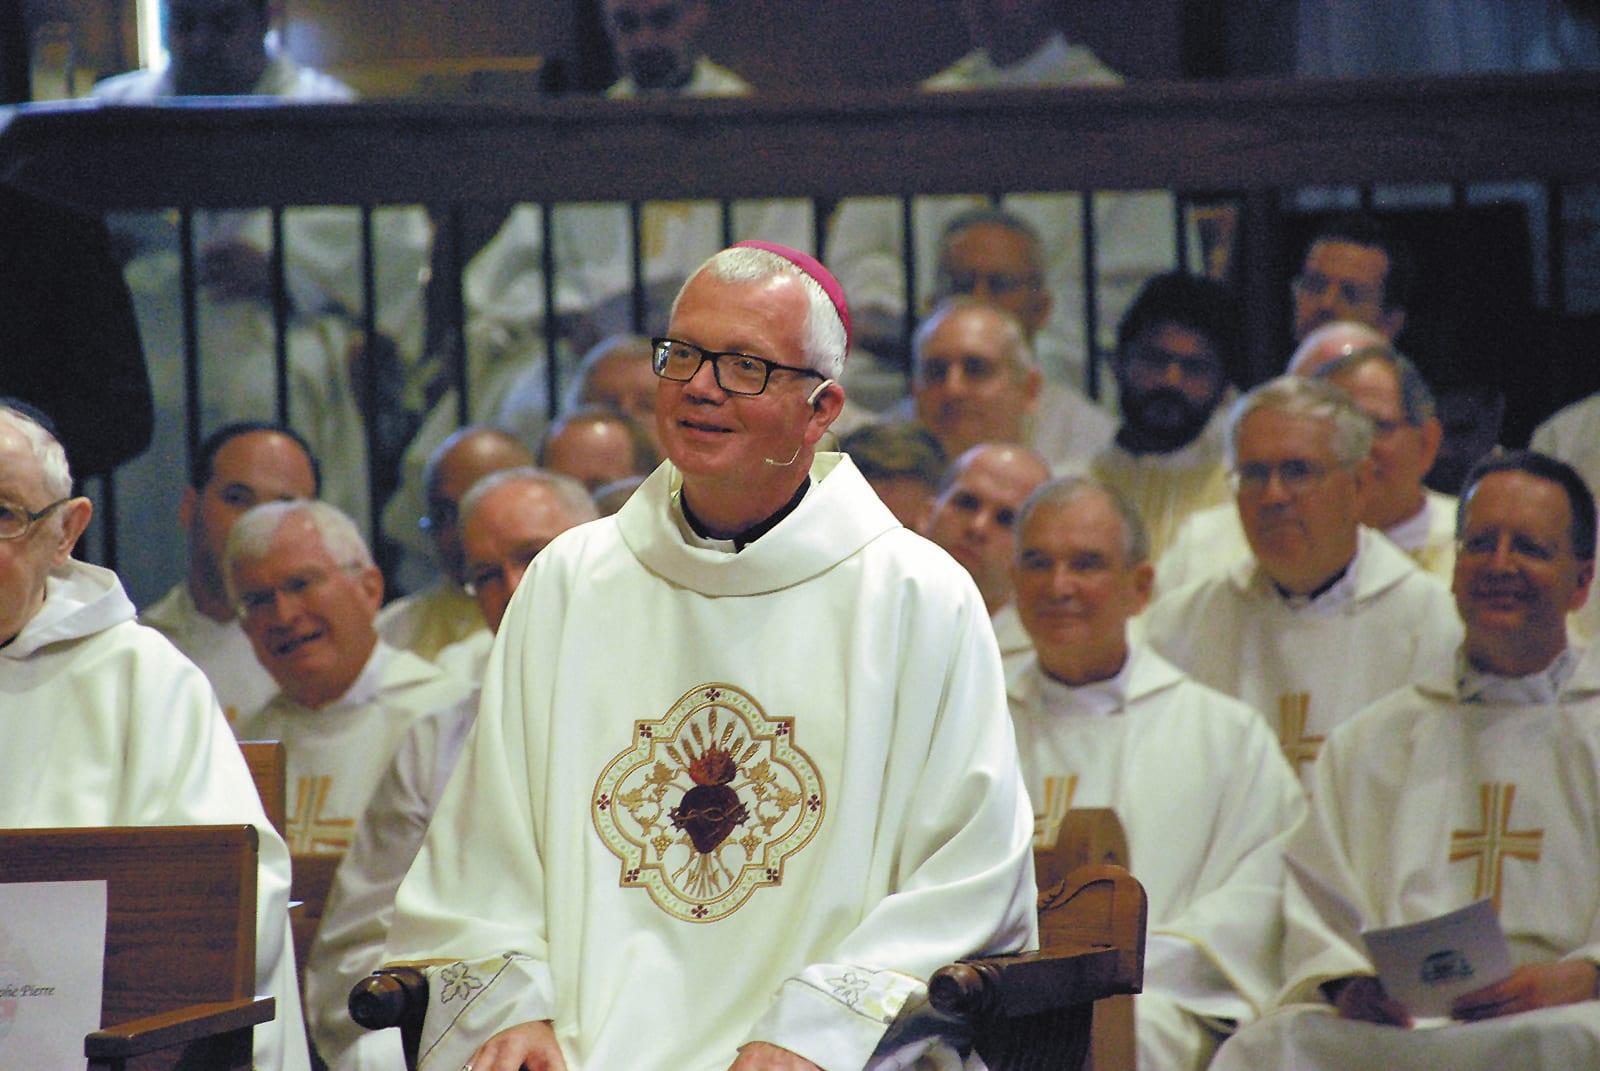 It’s ‘our moment’ to proclaim the good news, says Madison’s new bishop